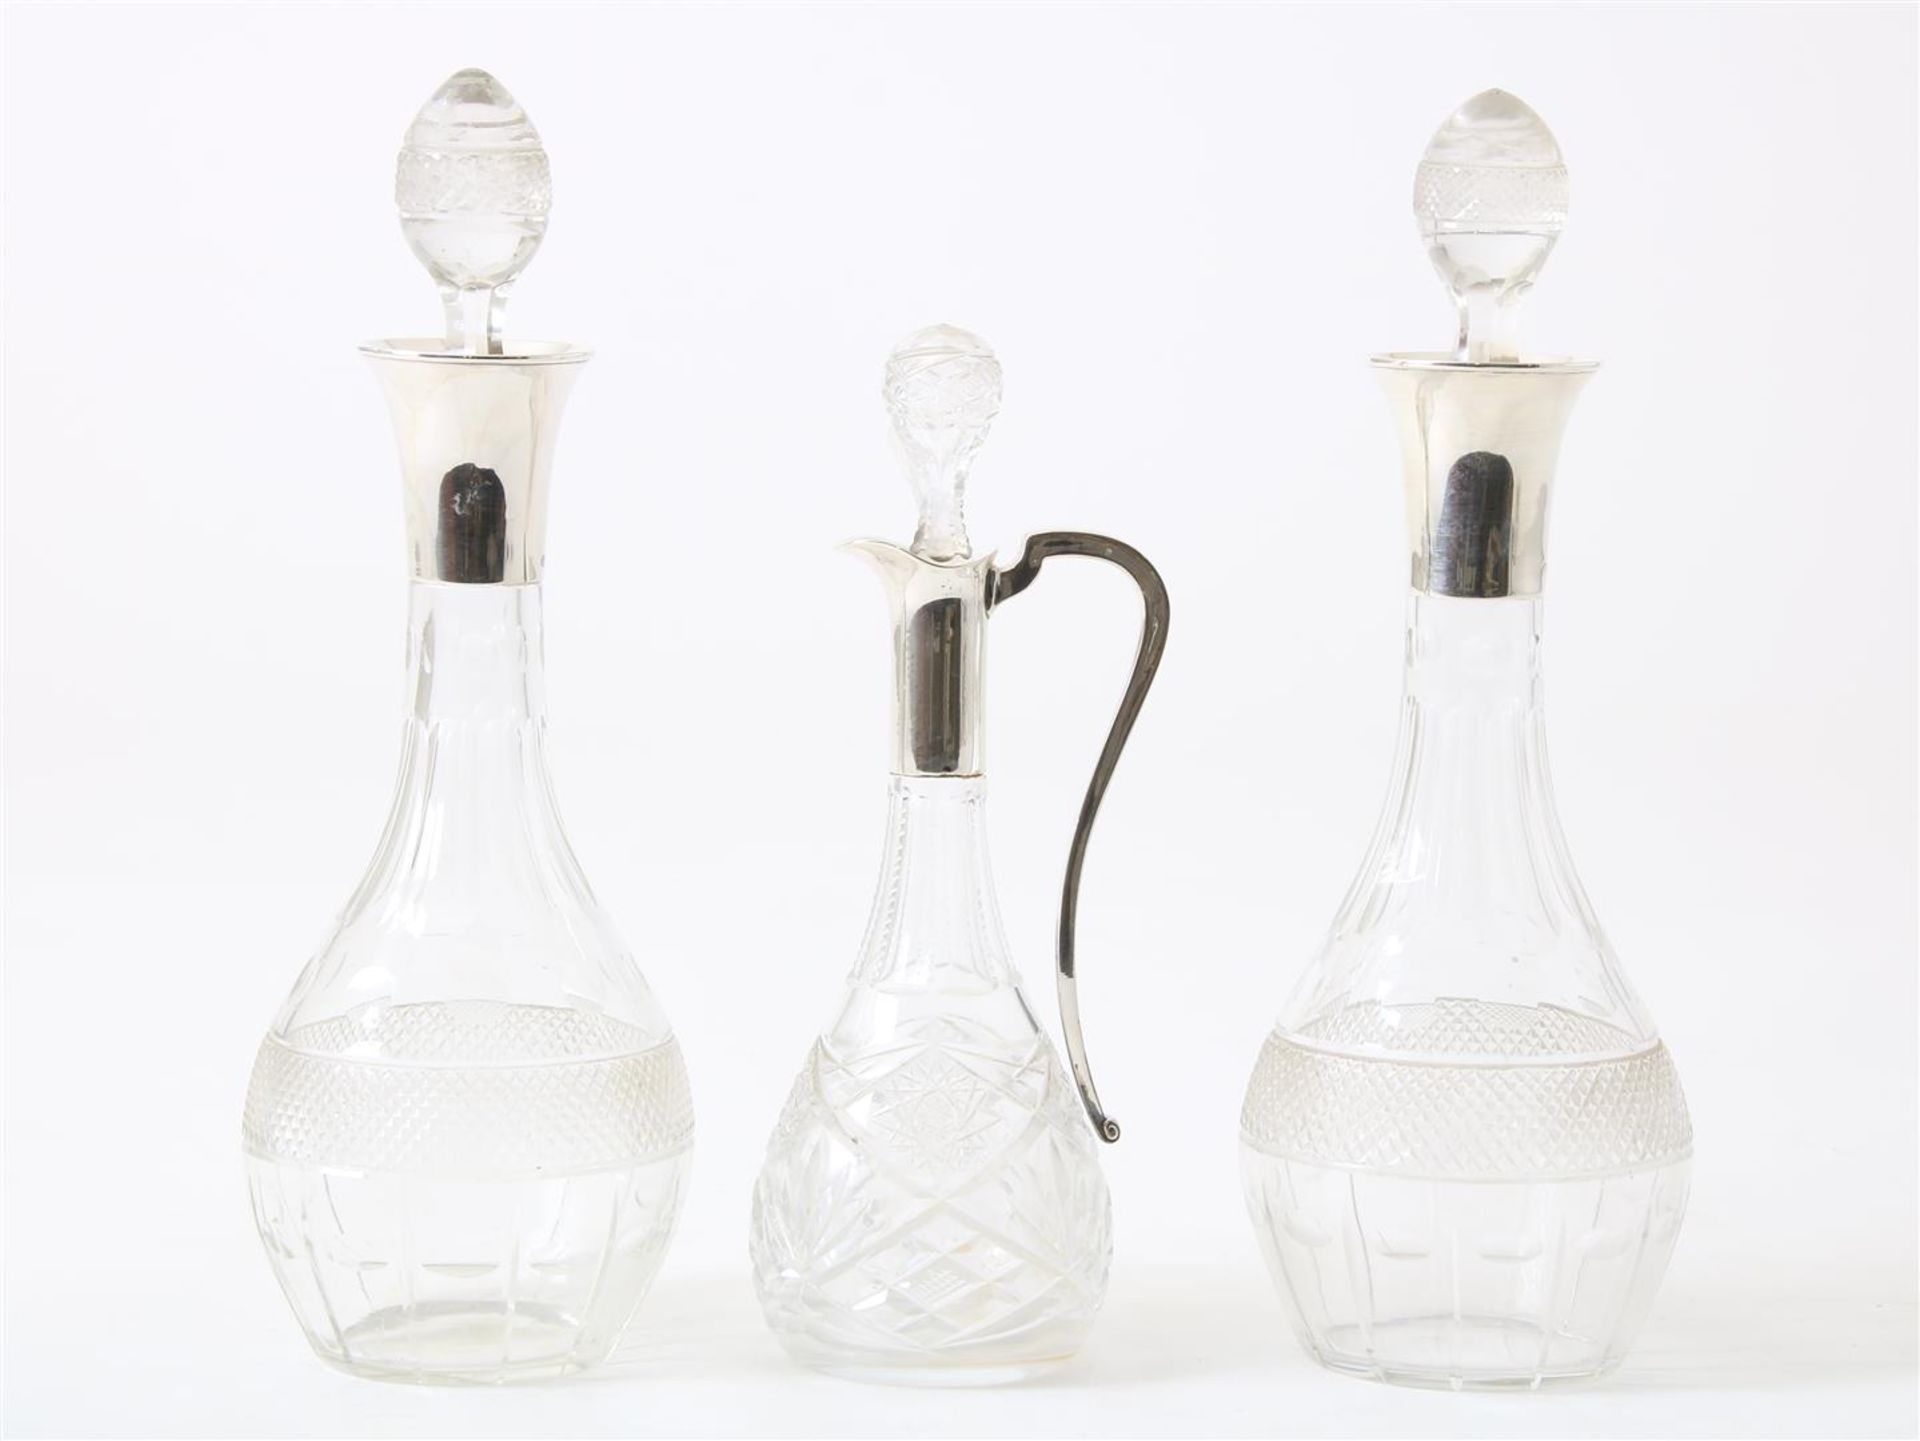 Set of crystal decanters with silver frames, and a crystal decanter with silver handle and frame